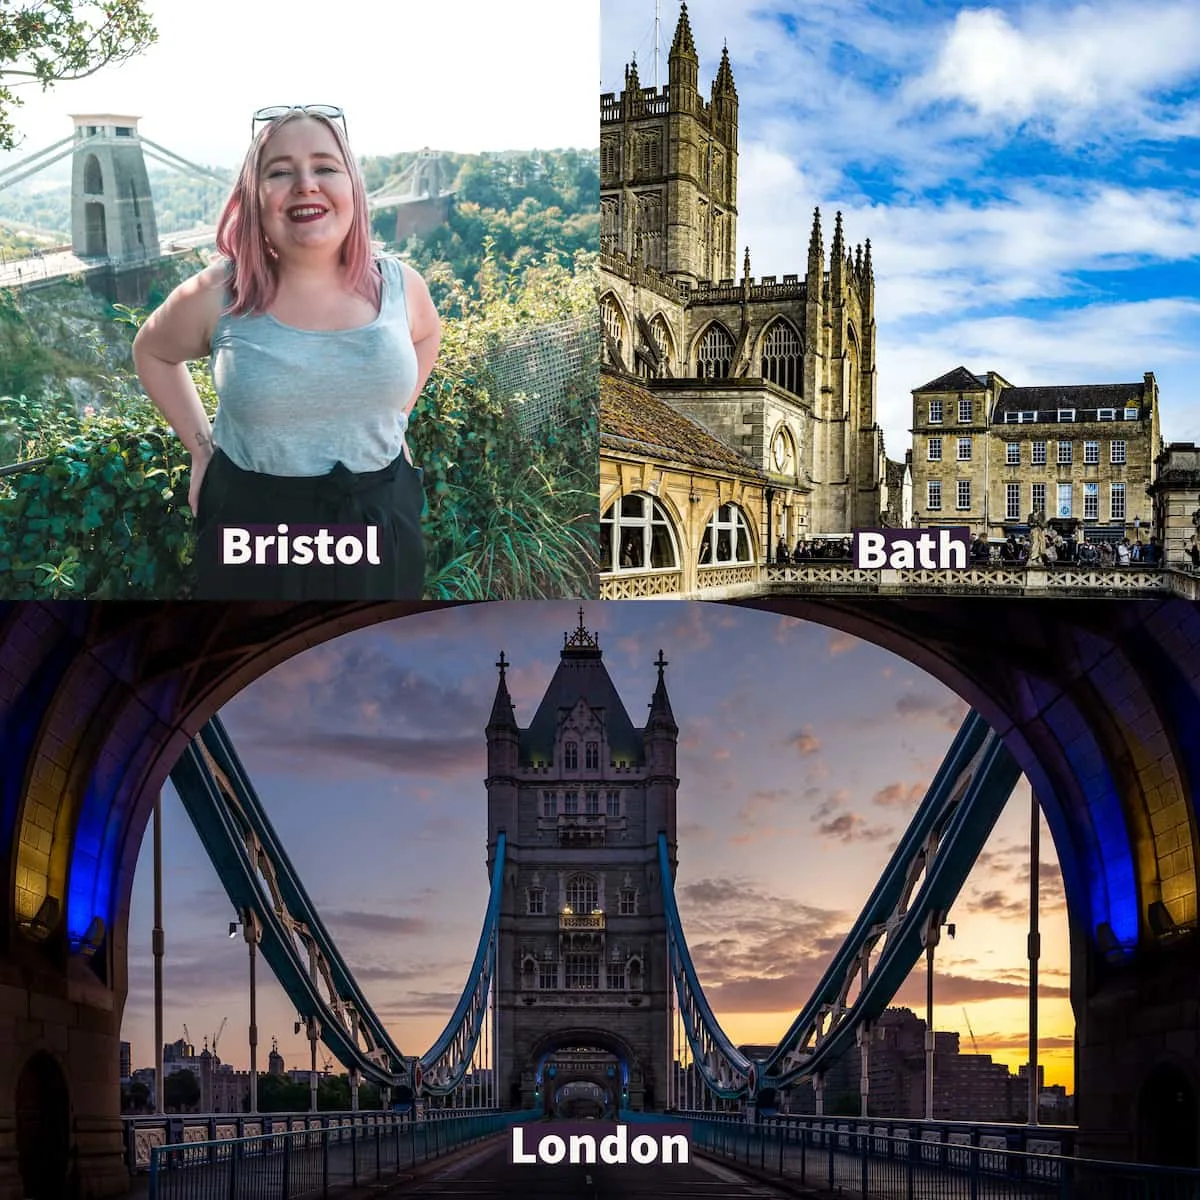 Top left, Kat at Clifton Bridge in Bristol, top right is the beautiful Bath building and bottom Tower Bridge. 